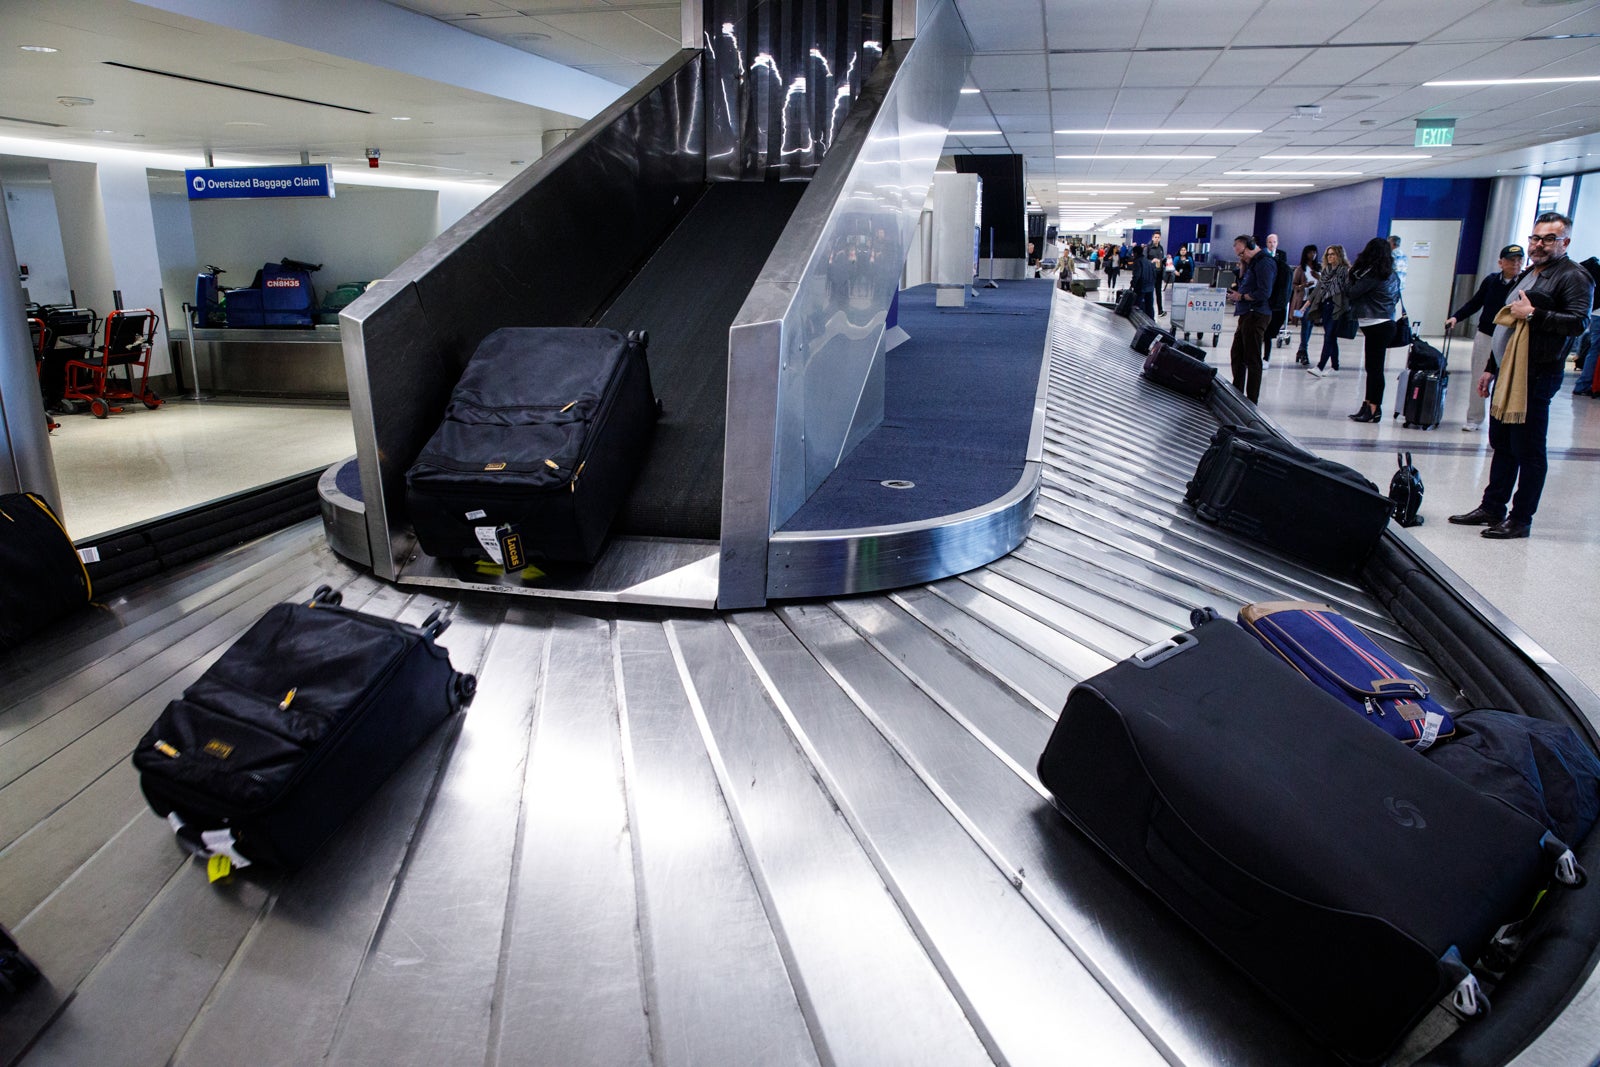 Baggage arrives from Delta Air Lines Inc. flights at Los Angeles International Airport (LAX) on Friday, March 29, 2019 in Los Angeles, Calif.